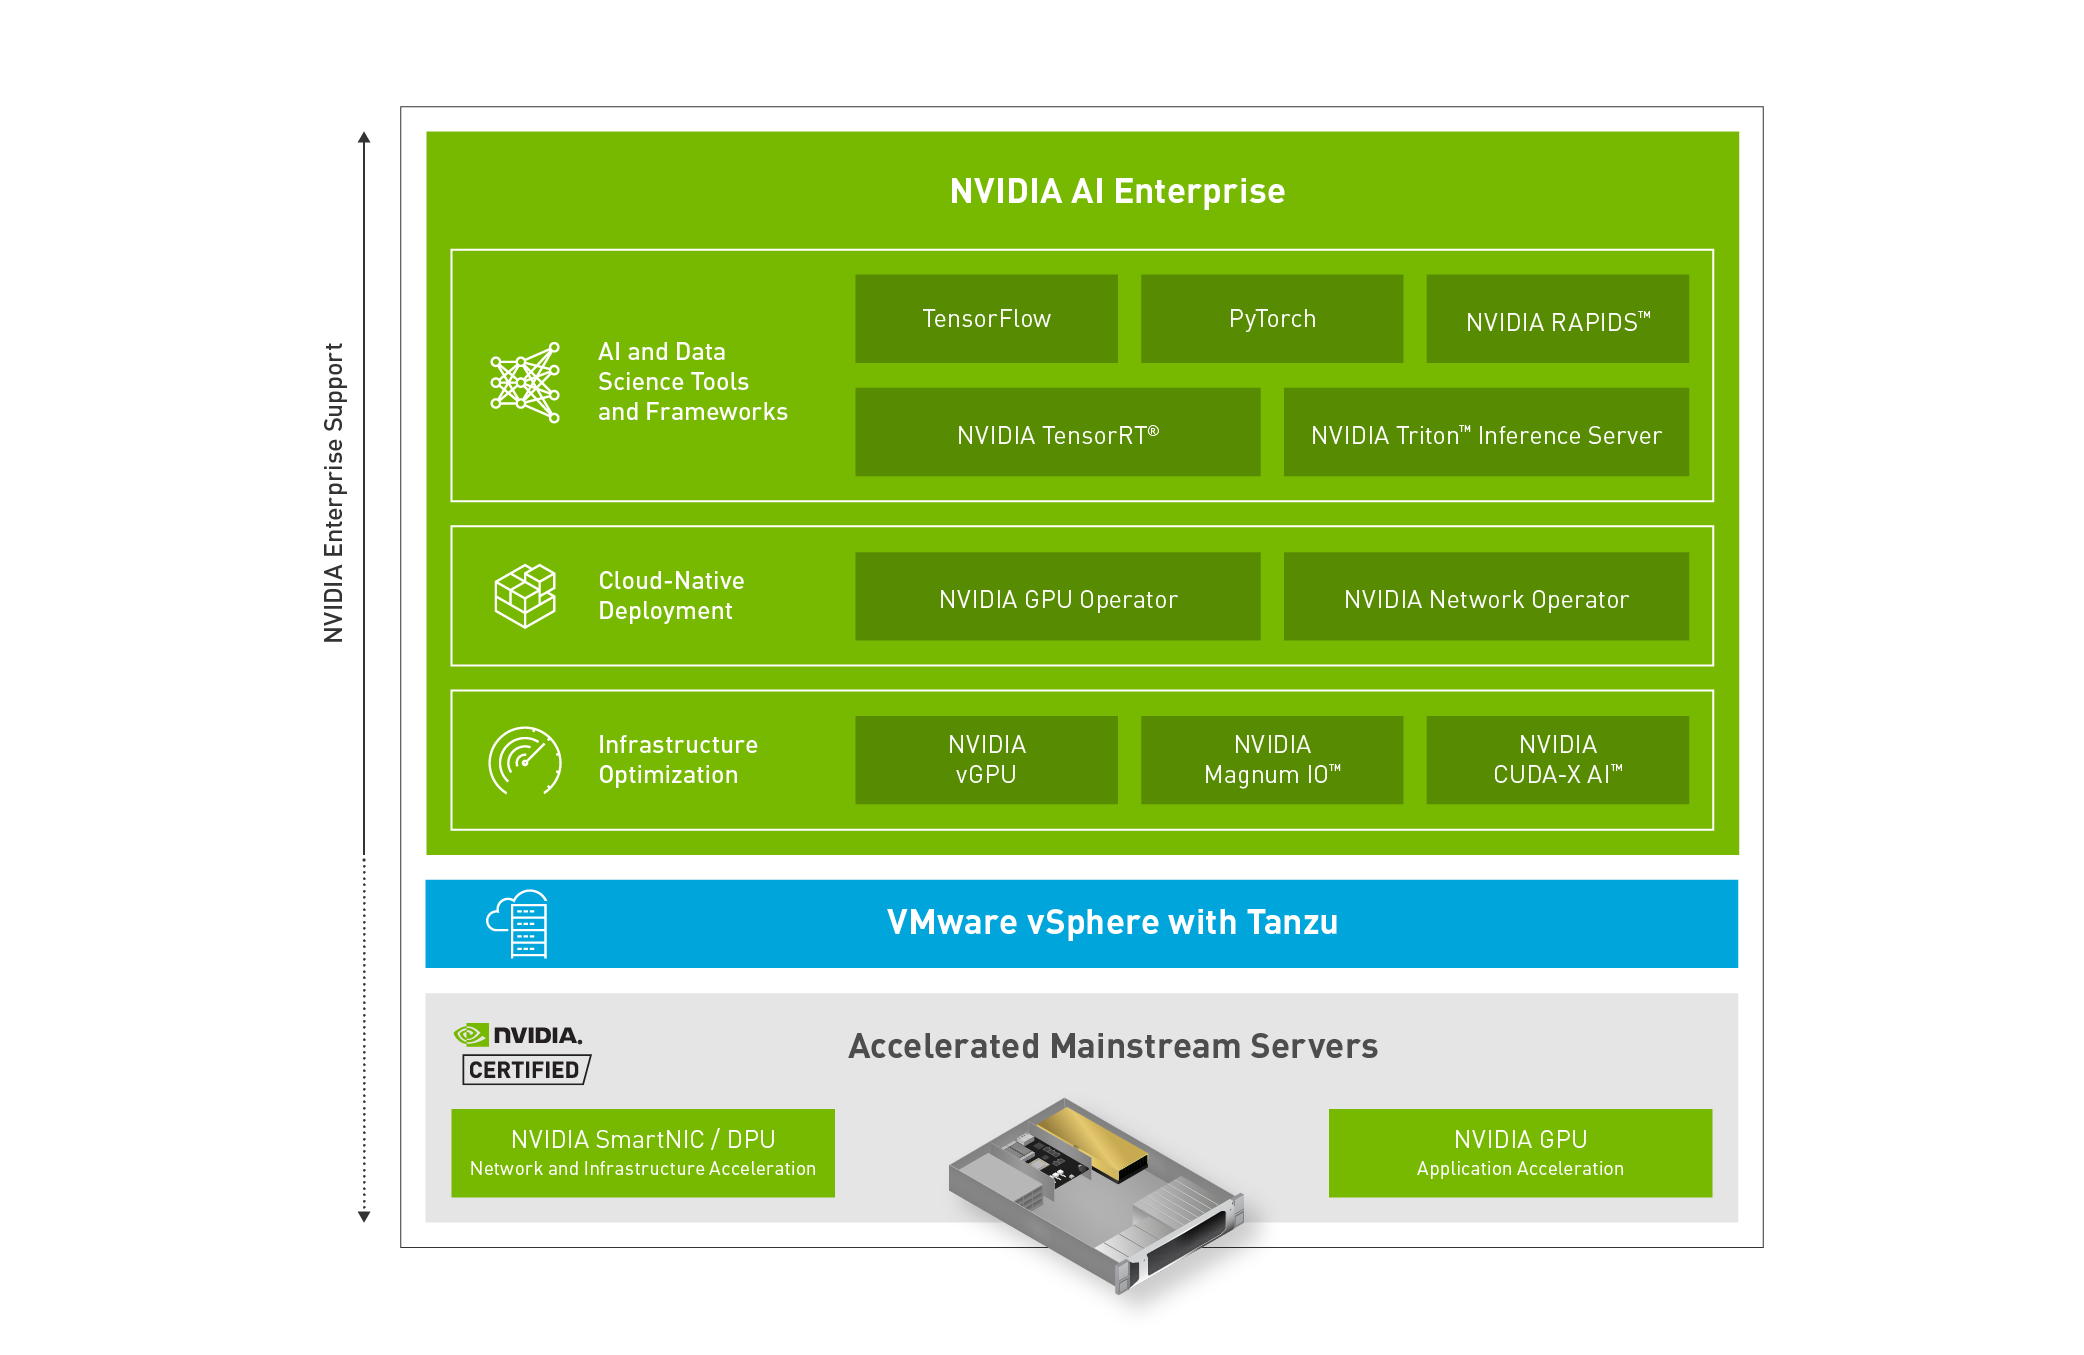 Diagram of the NVIDIA AI Enterprise solution architecture with apps for infrastructure optimization, cloud-native deployment, and AI and data science tools and frameworks.